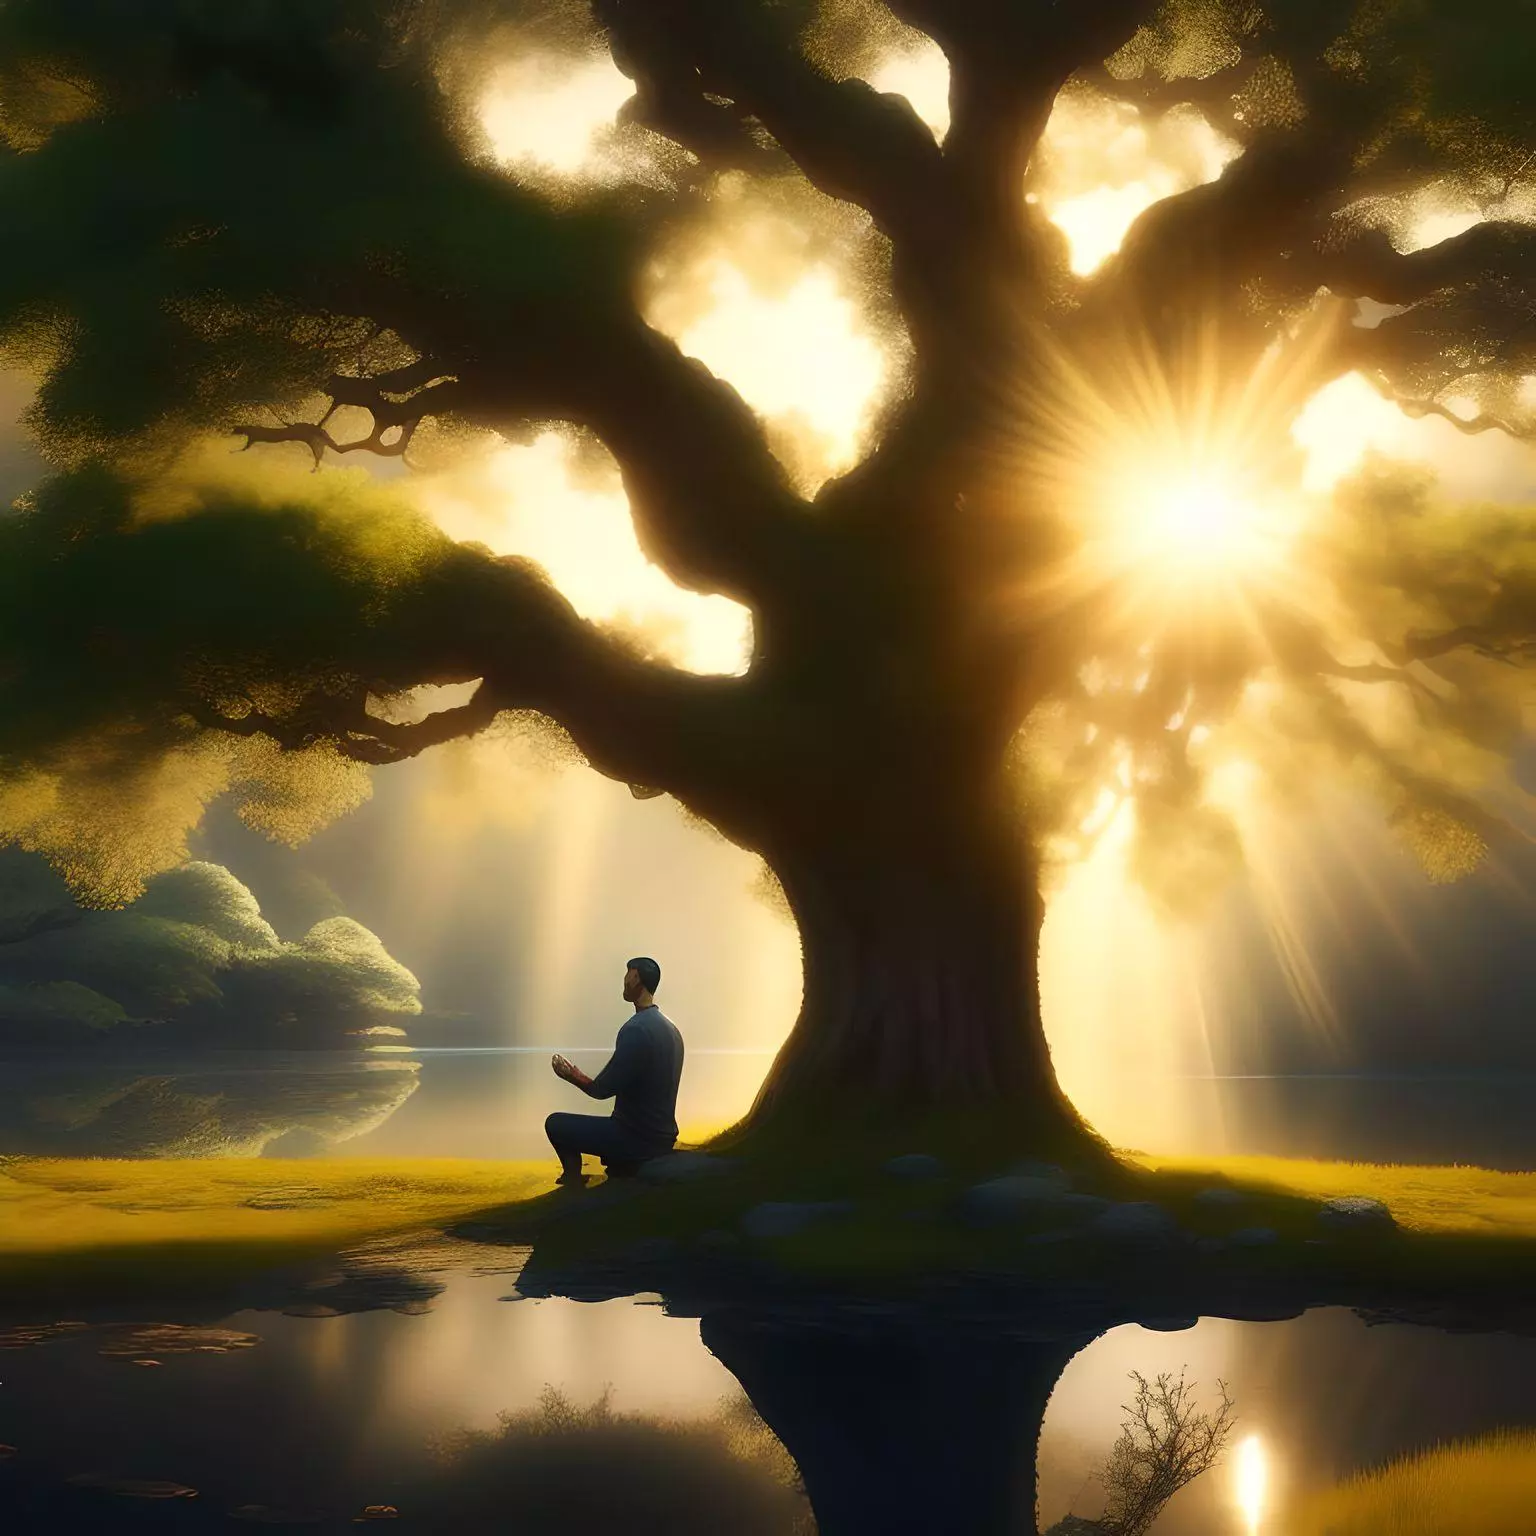 seated person meditating under a tree